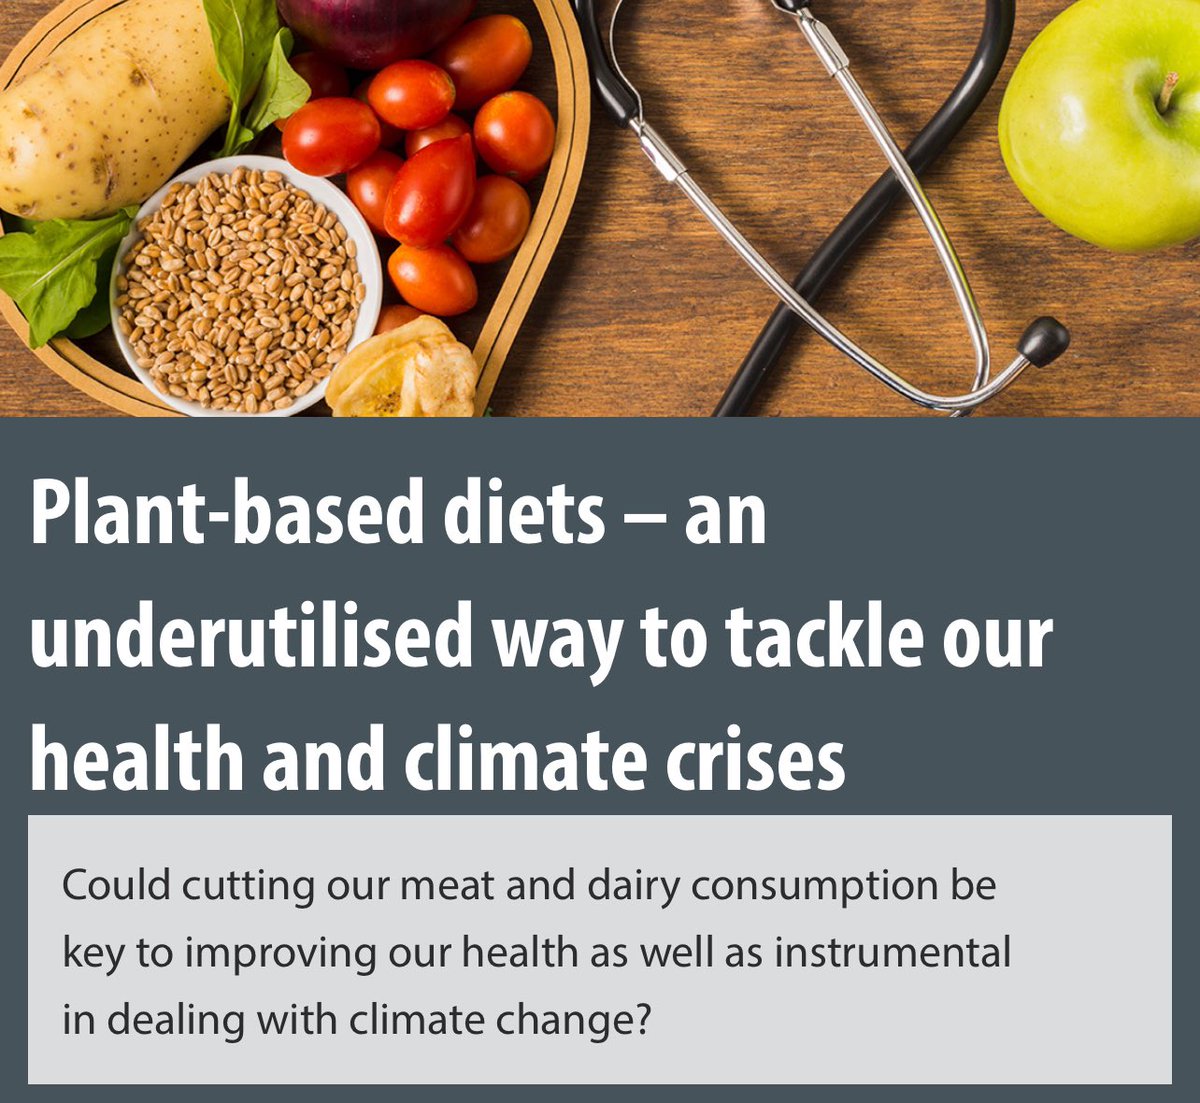 Thank you @RCPath for highlighting the importance of diet change and food system transformation as key to ensuring sustainable healthcare. Article by RCPath member @shireenkassam1 rcpath.org/resource-repor…